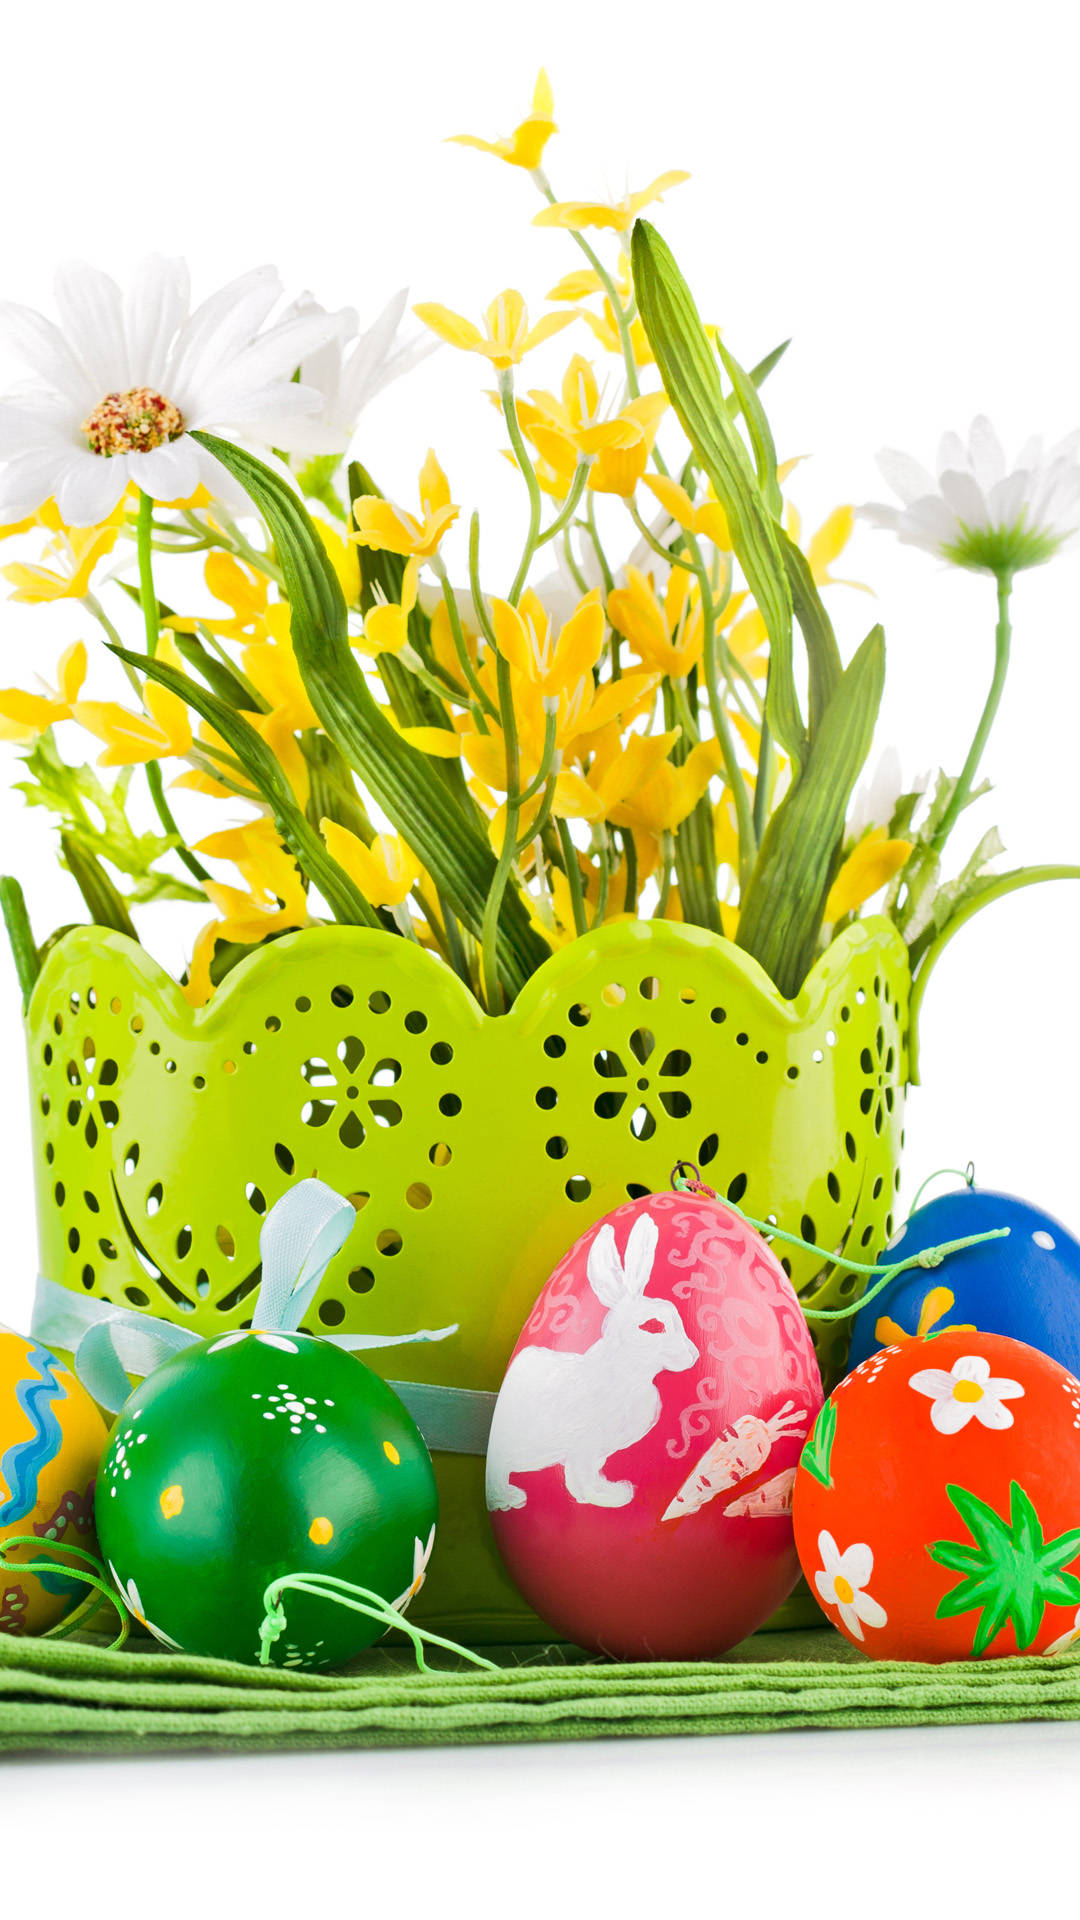 Get Ready To Celebrate Easter In Style With This Elegant Iphone Background